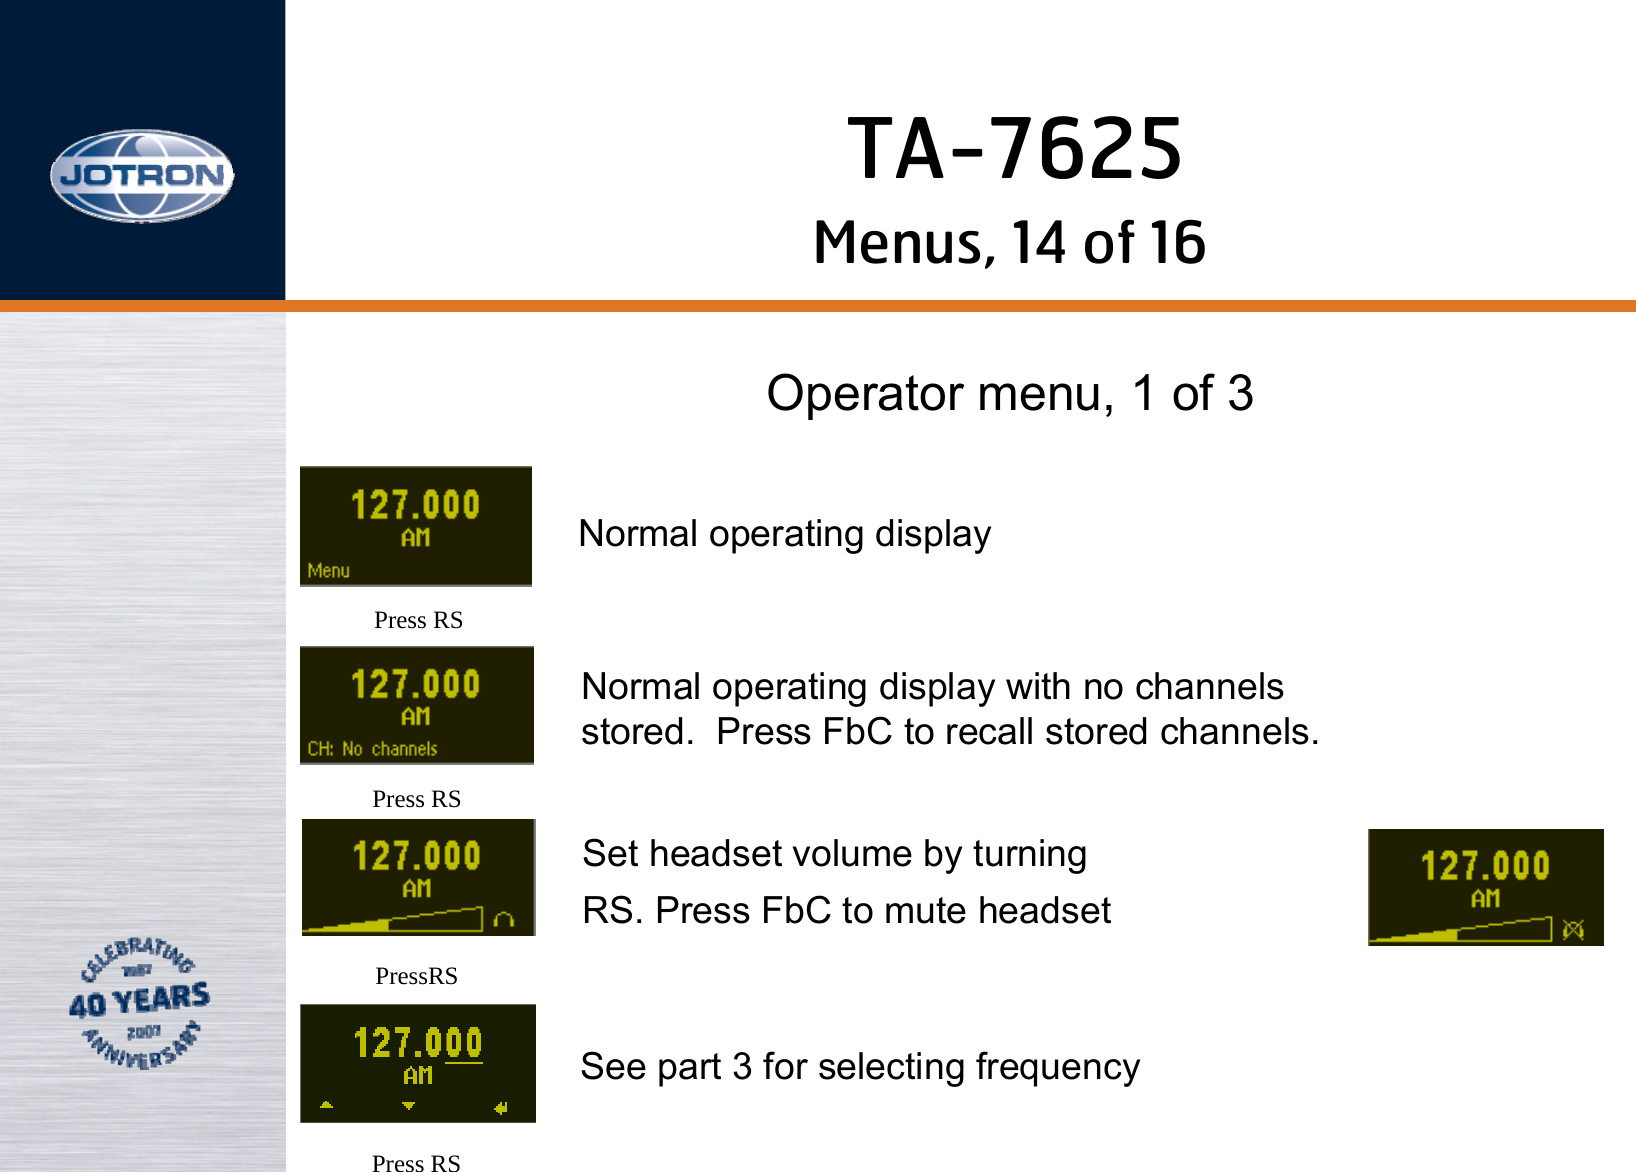 Menus, 14 of 16Operator menu, 1 of 3Press RSPress RSPressRSNormal operating displayNormal operating display with no channelsstored.  Press FbC to recall stored channels.Set headset volume by turning RS. Press FbC to mute headsetSee part 3 for selecting frequencyPress RSTA-7625